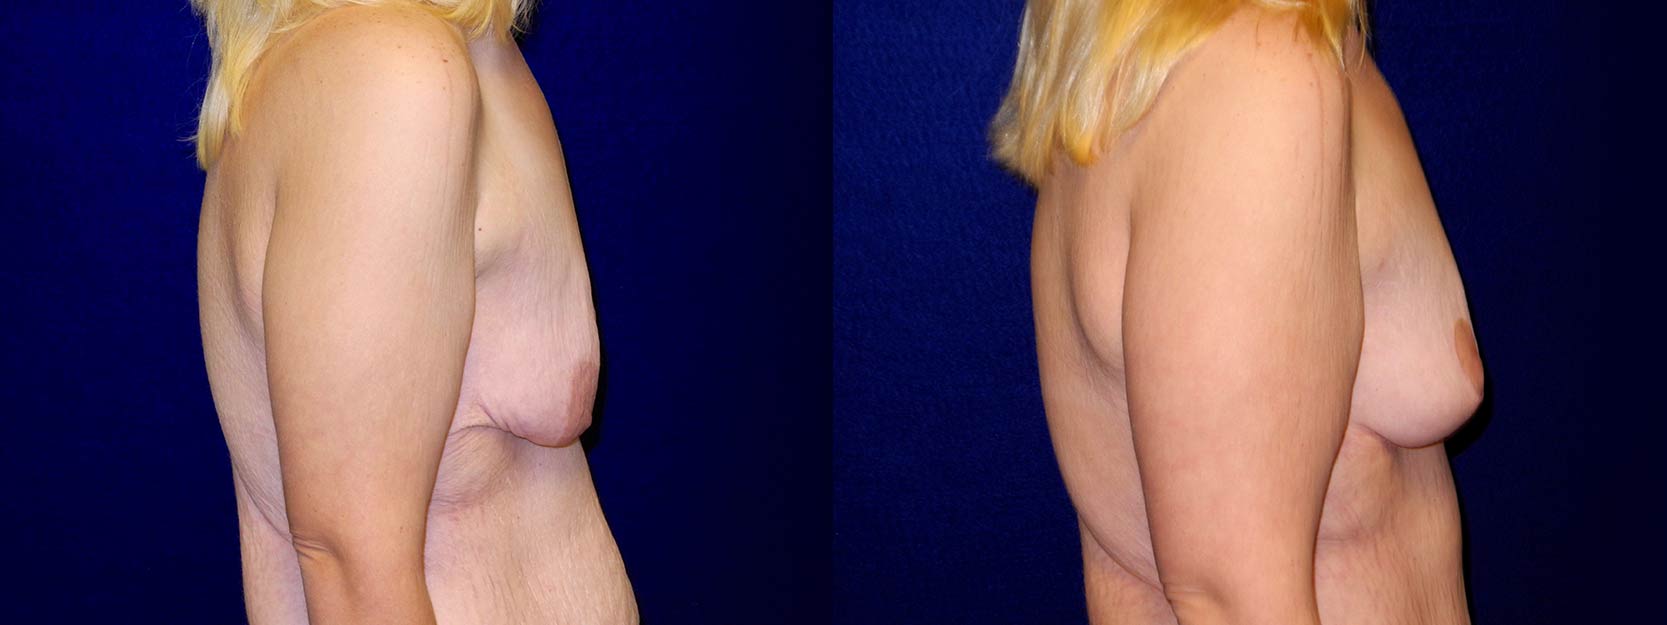 Right Profile View - Breast Lift After Weight Loss